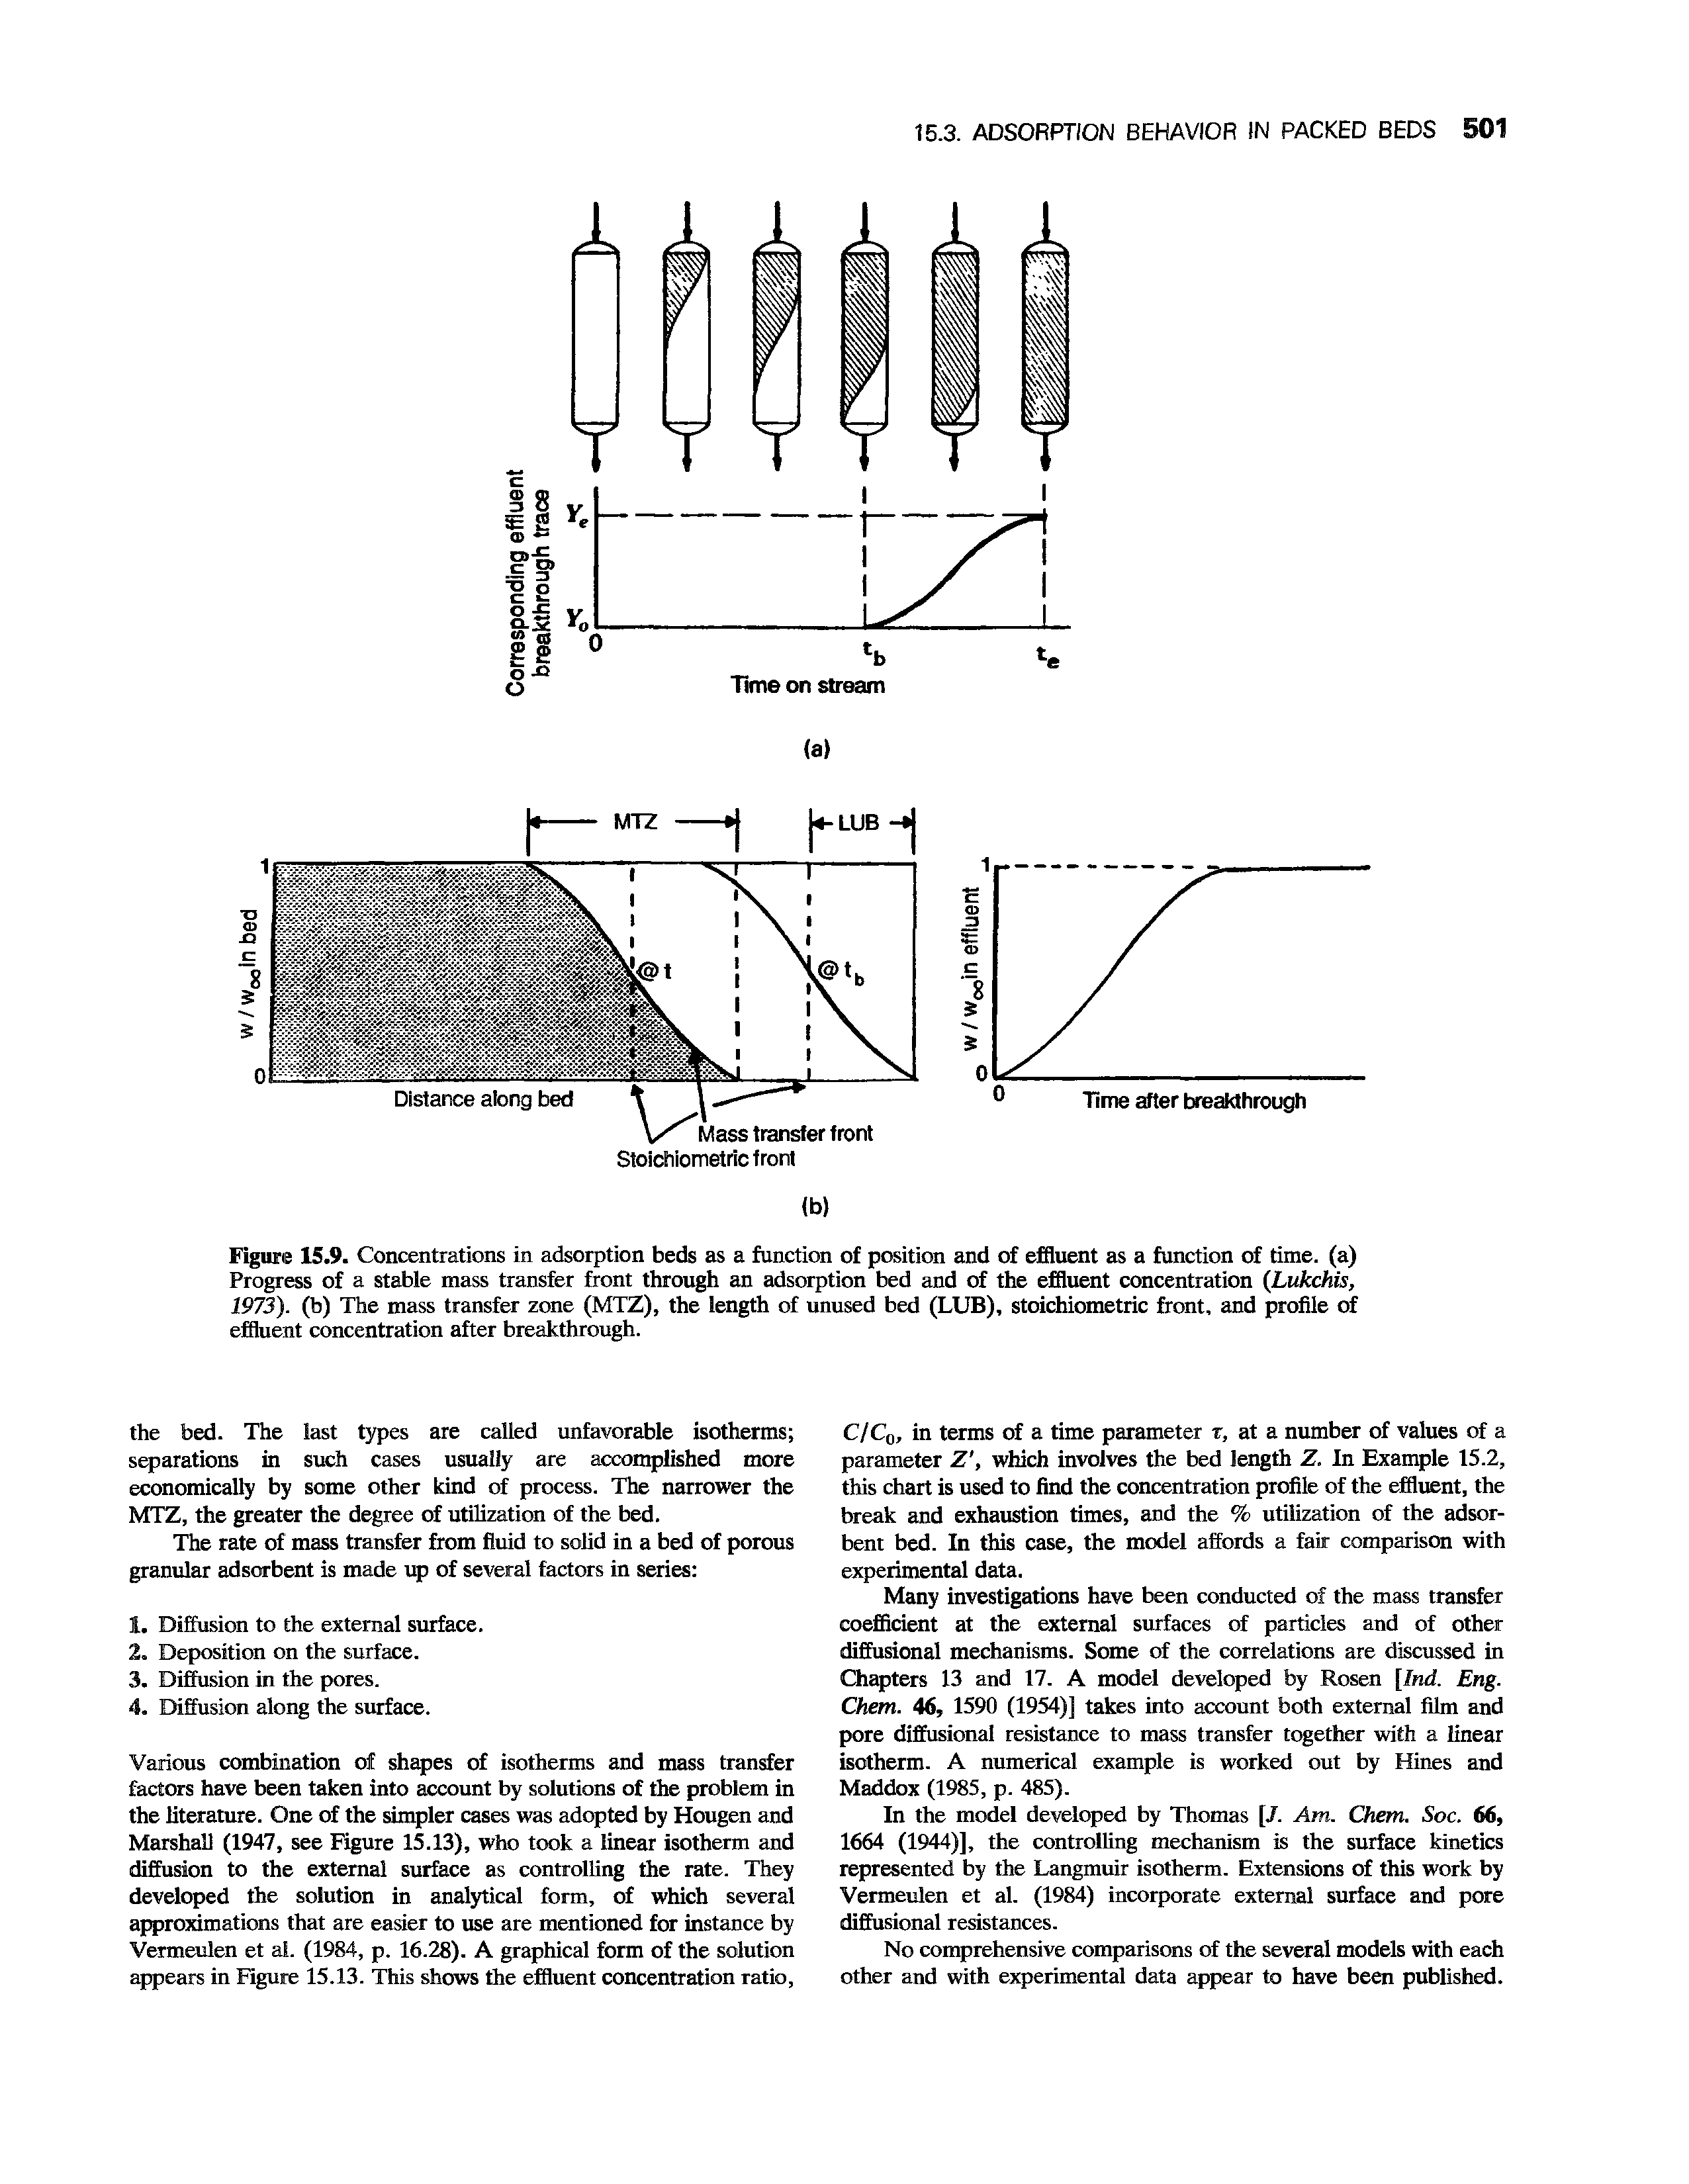 Figure 15.9. Concentrations in adsorption beds as a function of position and of effluent as a function of time, (a) Progress of a stable mass transfer front through an adsorption bed and of the effluent concentration (Lukchis, 1973). (b) The mass transfer zone (MTZ), the length of unused bed (LUB), stoichiometric front, and profile of effluent concentration after breakthrough.